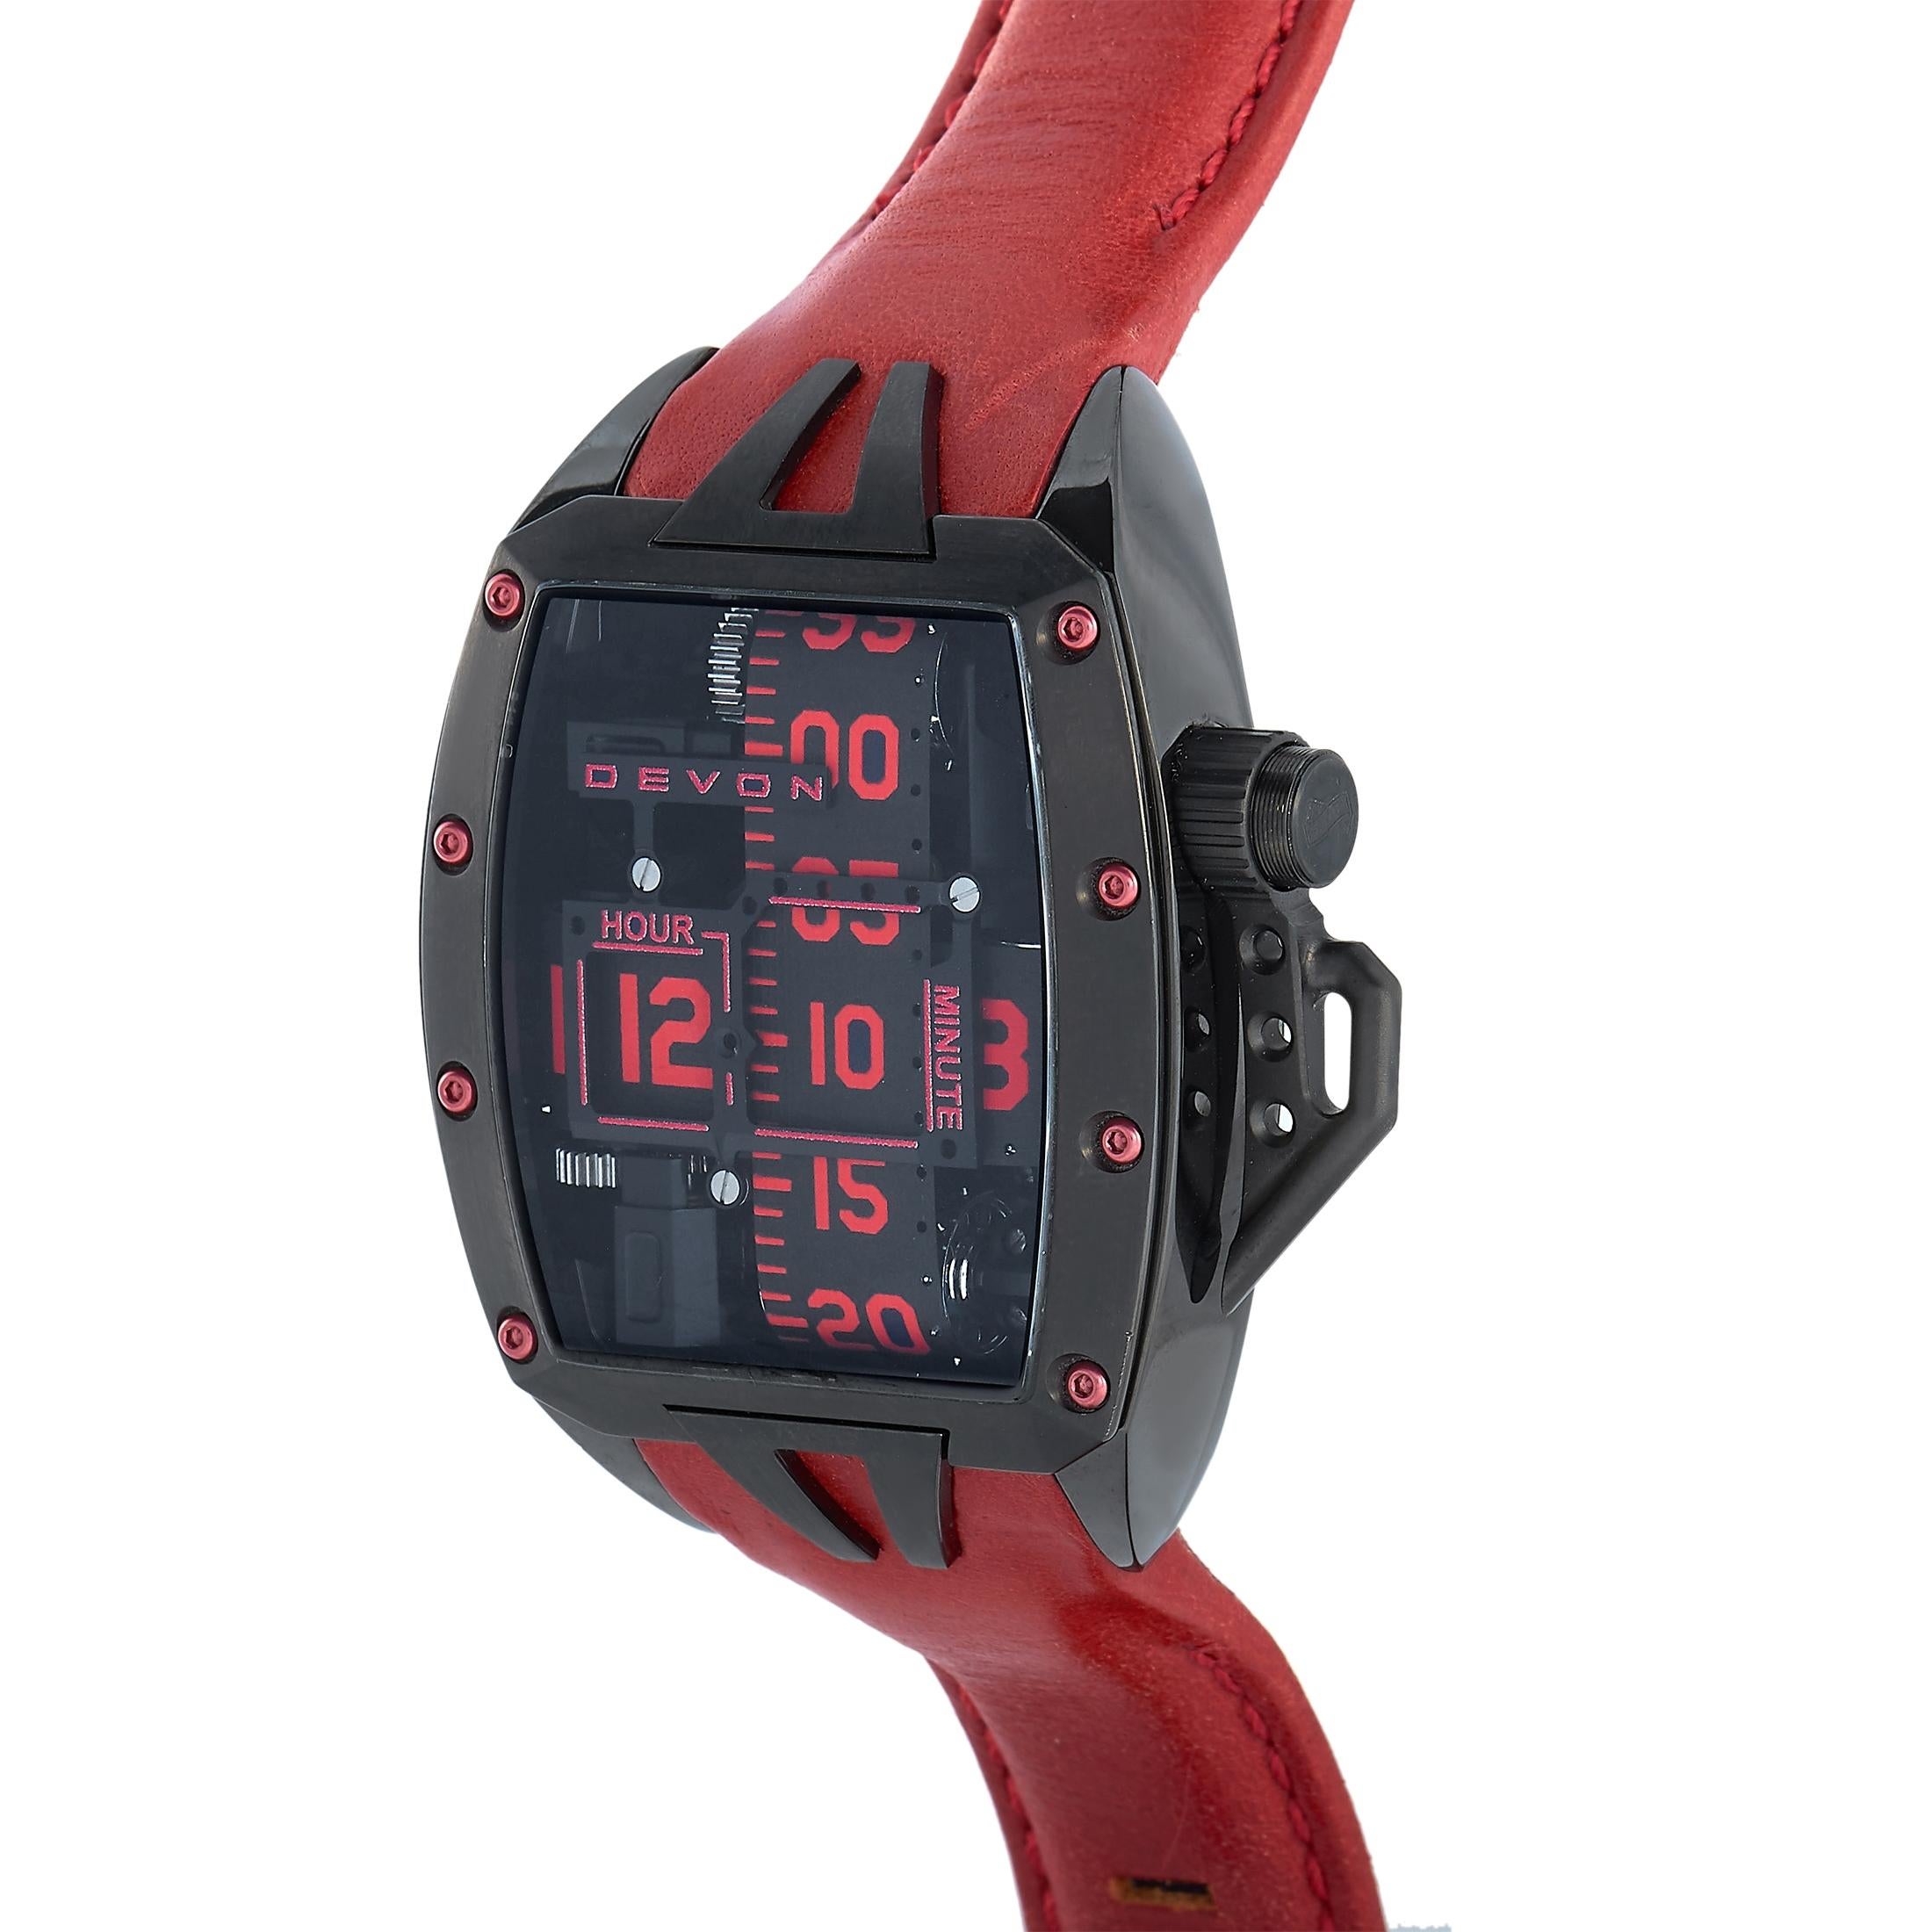 This is the Devon Tread 2 Murder timepiece, reference number 847339004473.

The watch is presented with a black DLC-coated stainless steel case with red accents that features “REDRUM” on the back – a nod to the famous plot device from Stephen King's